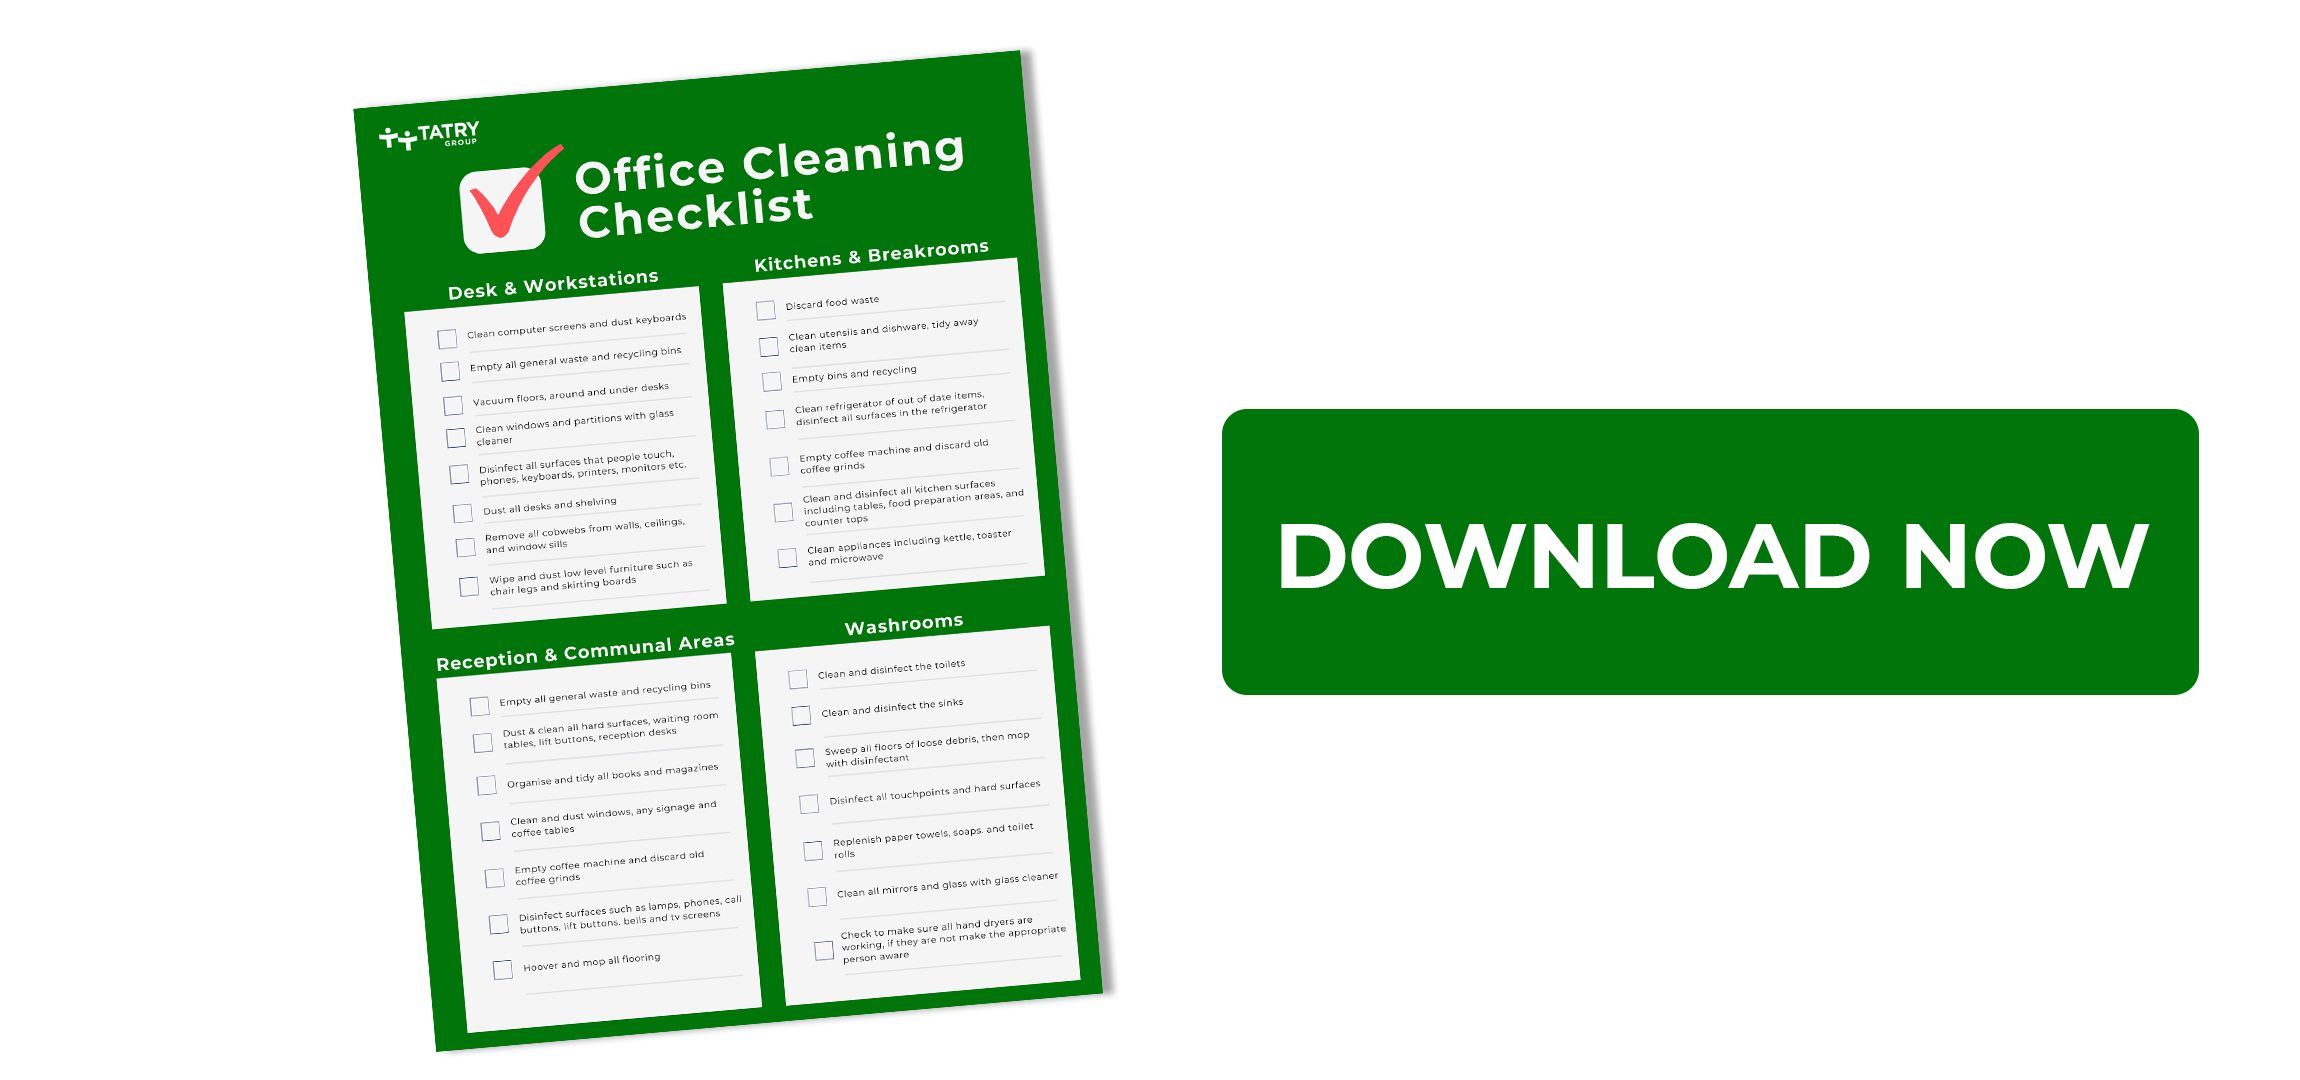 Download Office Cleaning Checklist